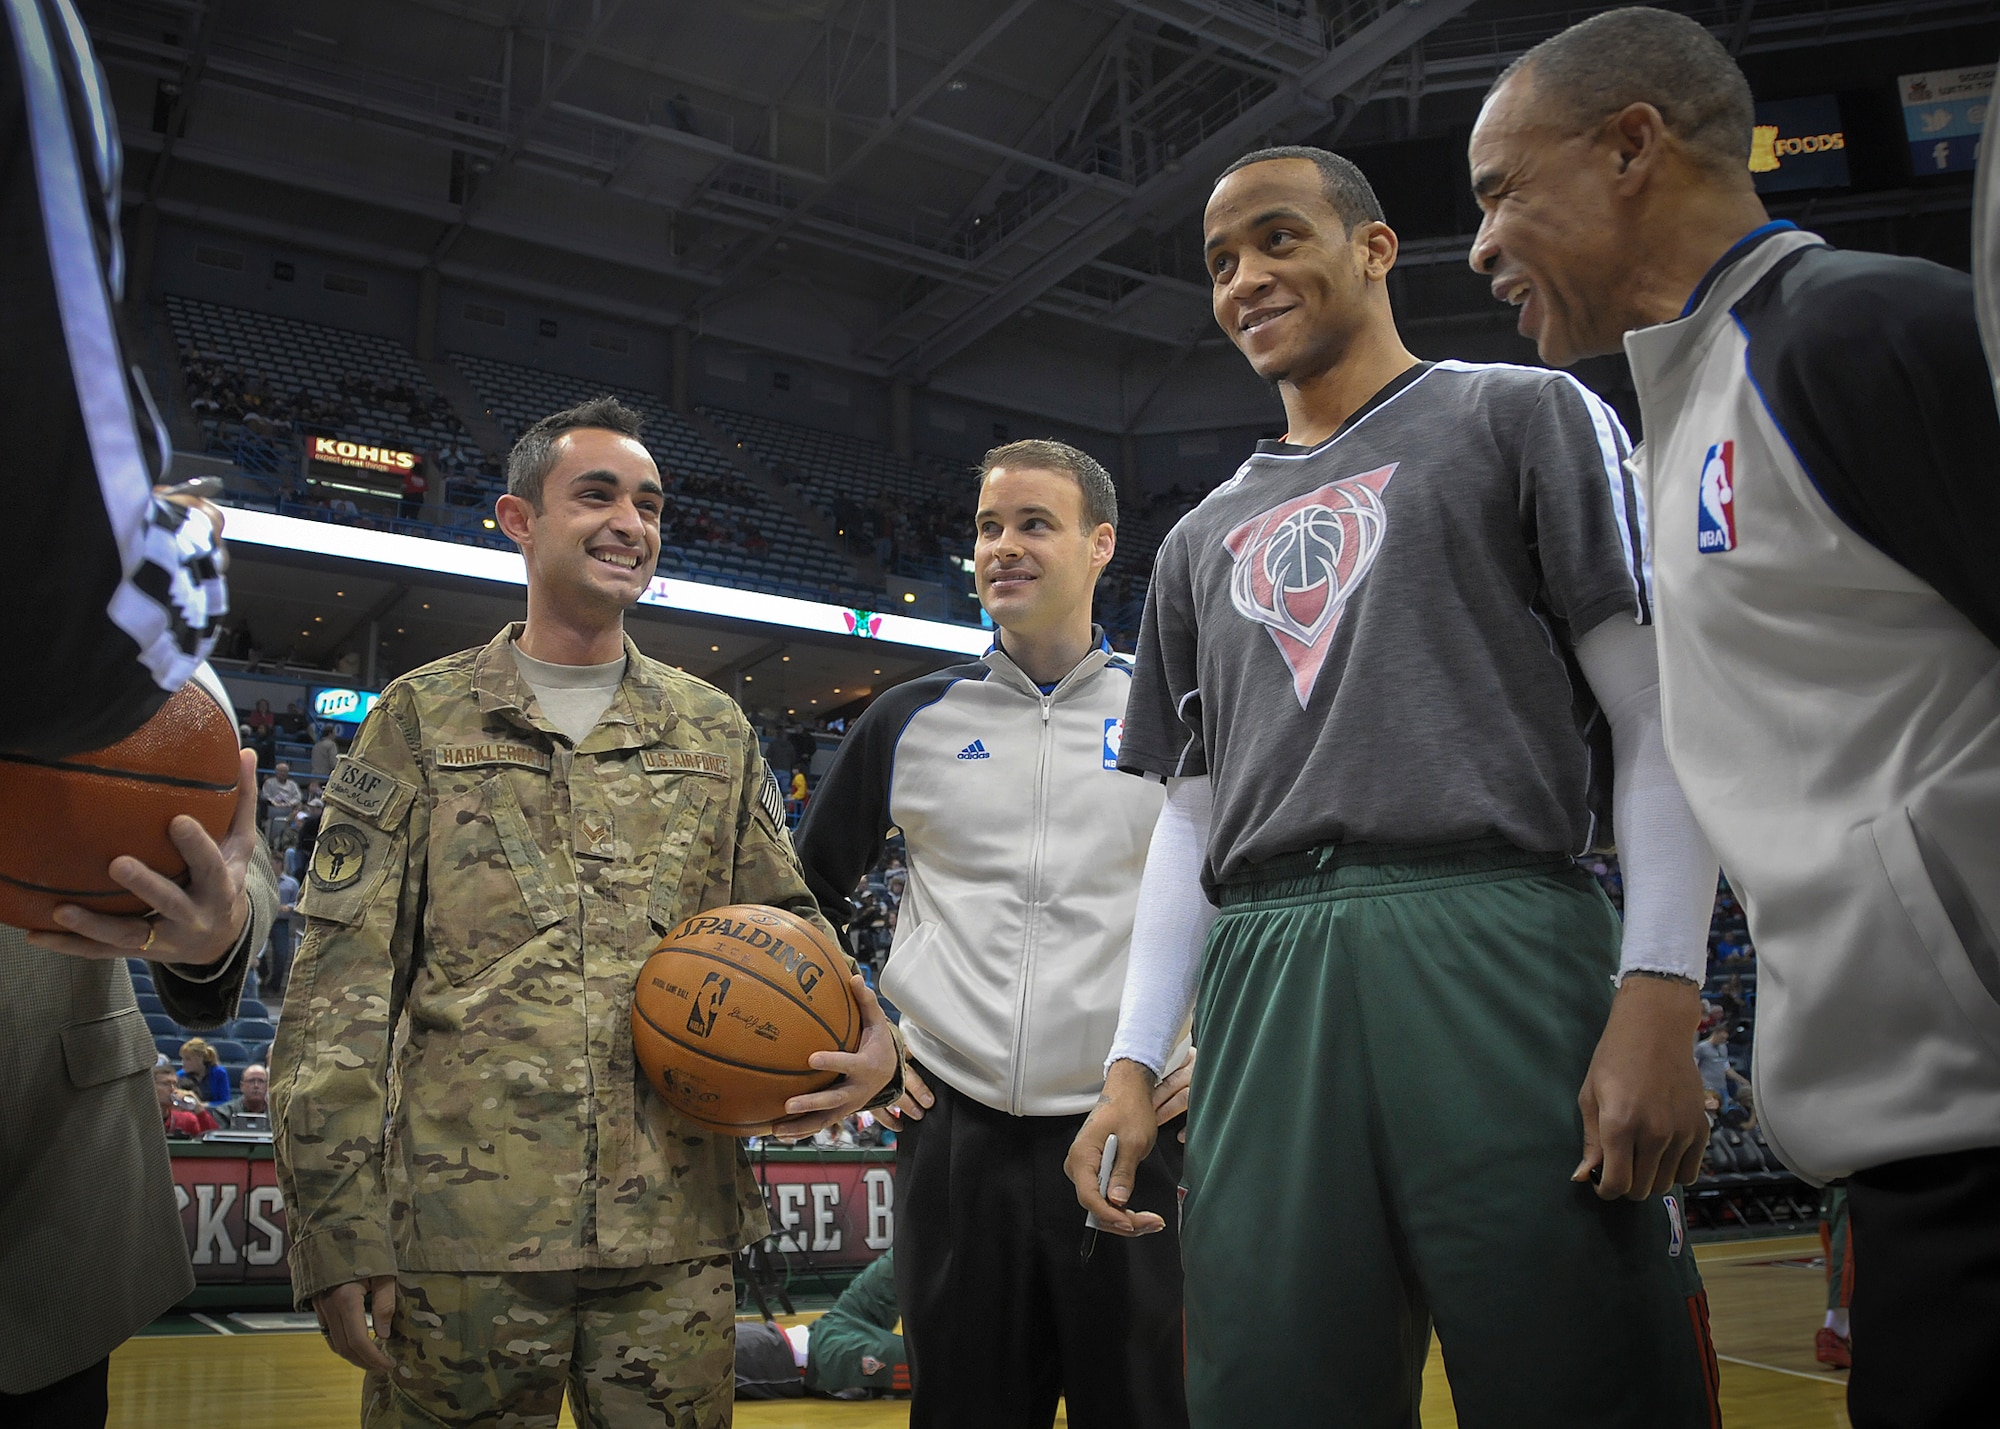 Senior Airman Jefferson Harkleroad is all smiles at center court of the BMO Harris Bradley Center in Milwaukee Wed., April 3, 2013.  
Harkleroad, an Air Force electrician serving in the Civil Engineering Squadron at Milwaukee’s 128th Air Refueling Wing, was honored by the Milwaukee Bucks and Waukesha Metal as part of their “Hardwood Homecoming” program. (Air National Guard Photo by 1st Lt. Nathan Wallin / Released)